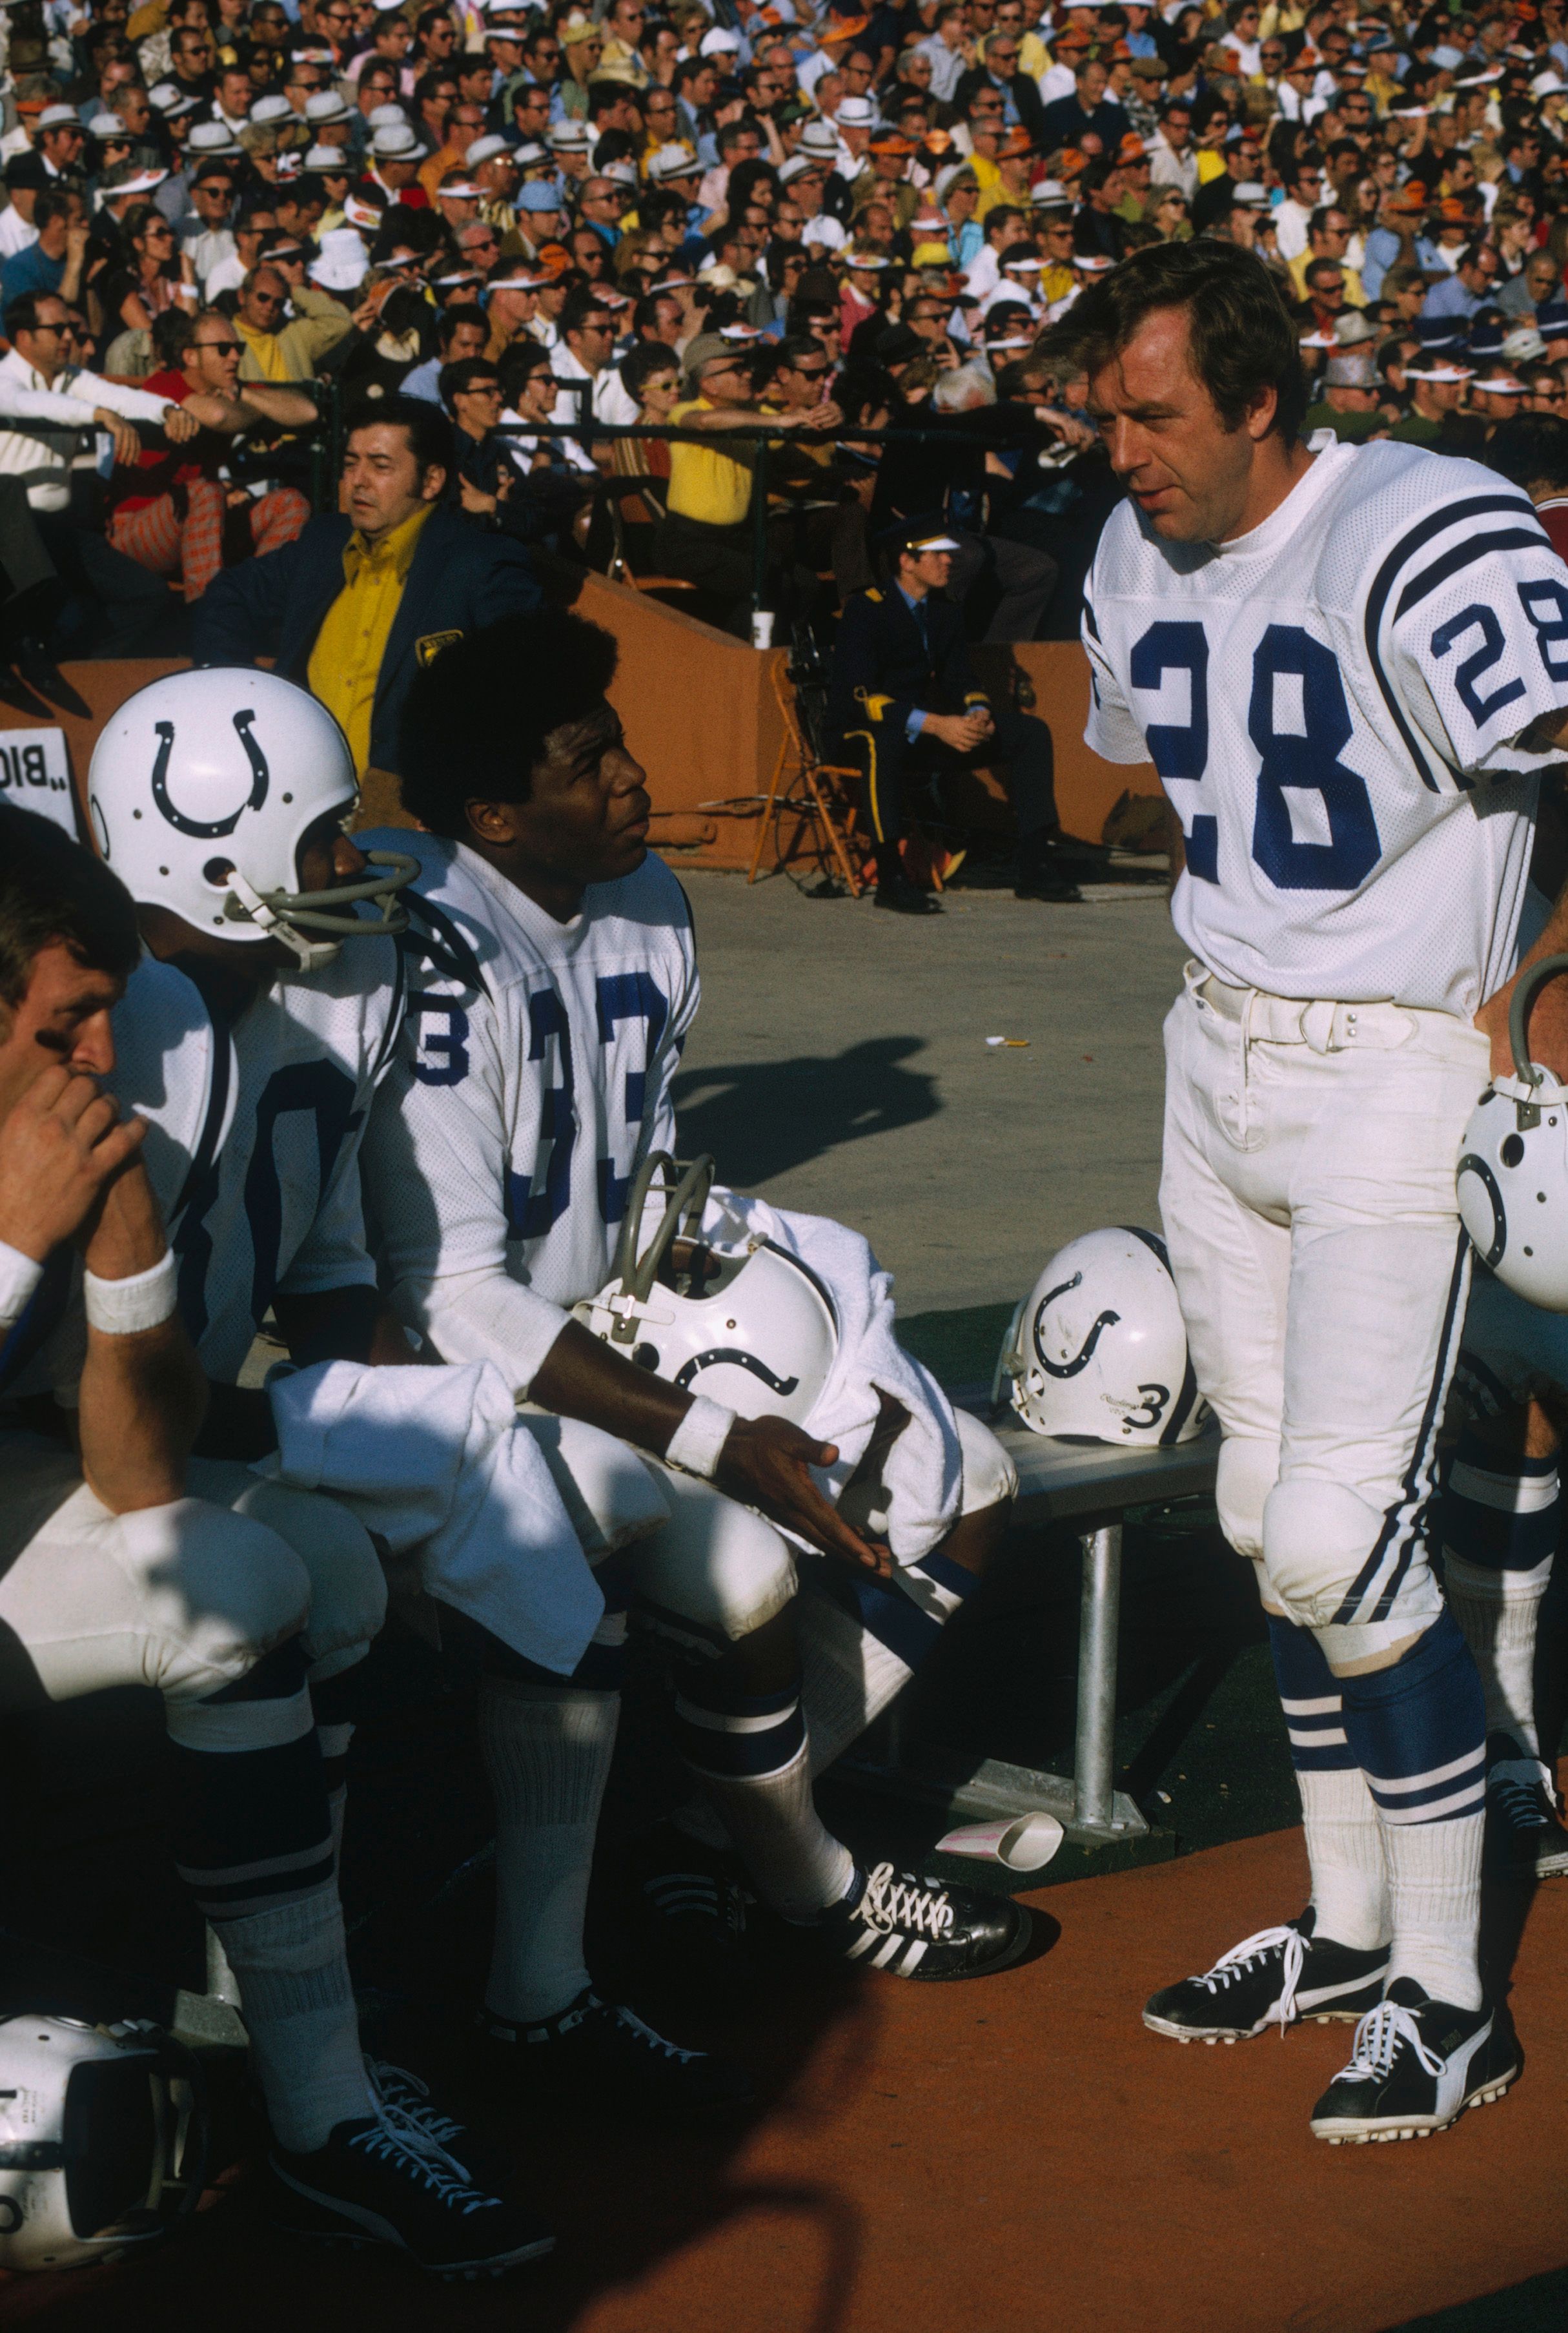 Baltimore Colts' wide receiver Jimmy Orr #28 talks to teammates on the sidelines at Super Bowl V against the Dallas Cowboys at the Orange Bowl on January 17, 1971 | Photo: Getty Images